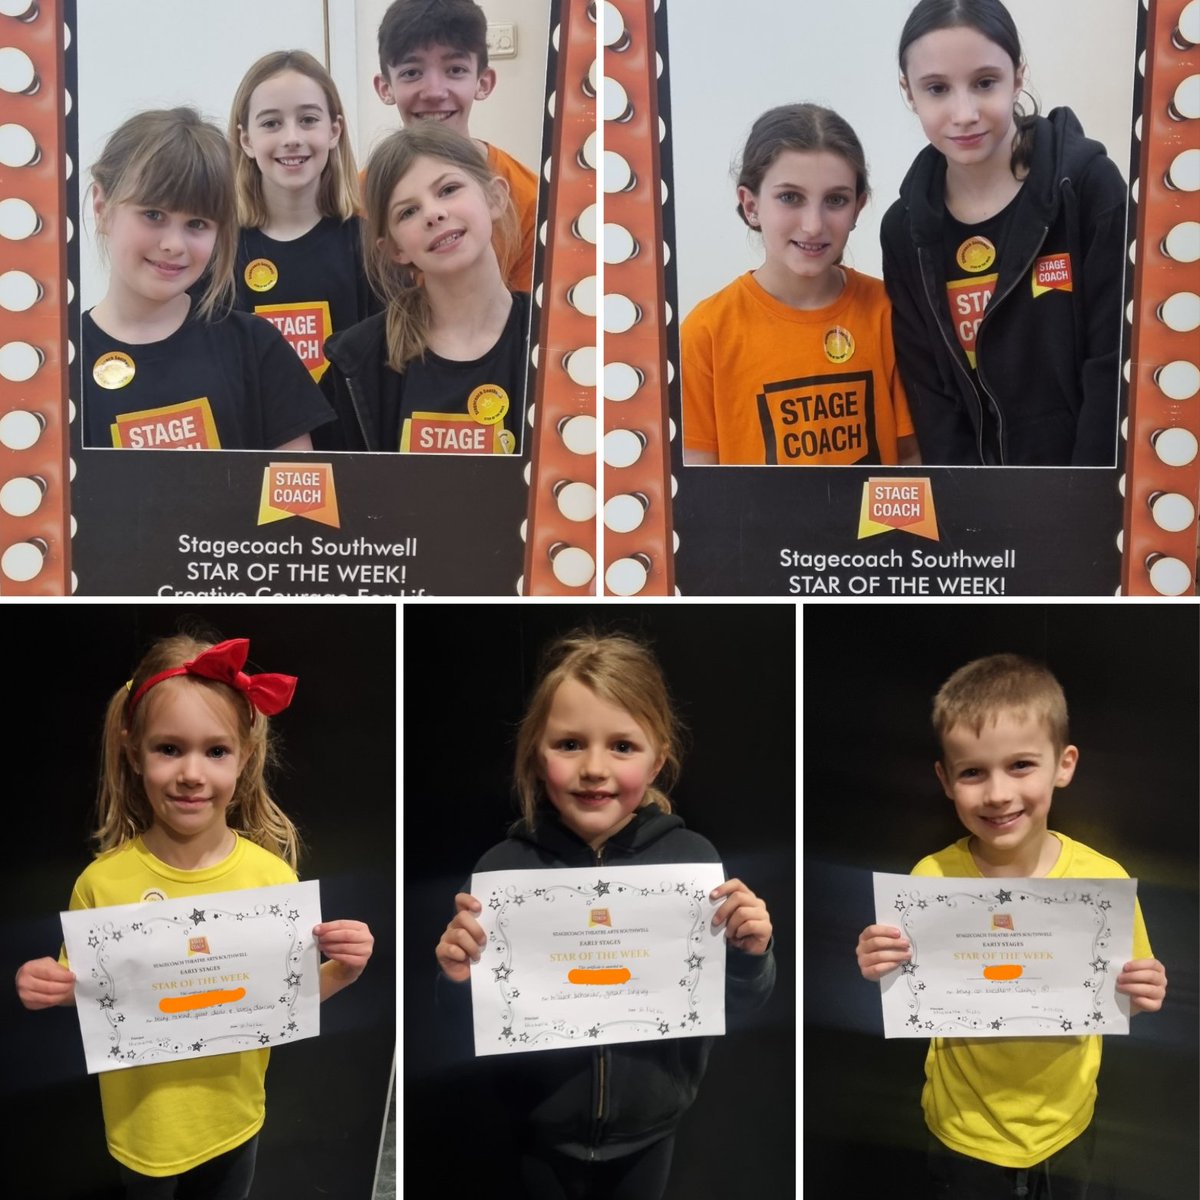 We had a great first week back at Stagecoach!! Here are our first Stars of the Week for the Summer Term 😊 #StagecoachSouthwell #TeamSouthwell #Sing #Dance #Act #Starsoftheweek #Makingmemories #Friendship #PerformingArts #creativecourageforlife #stagecoachfamily #makingnewfriends